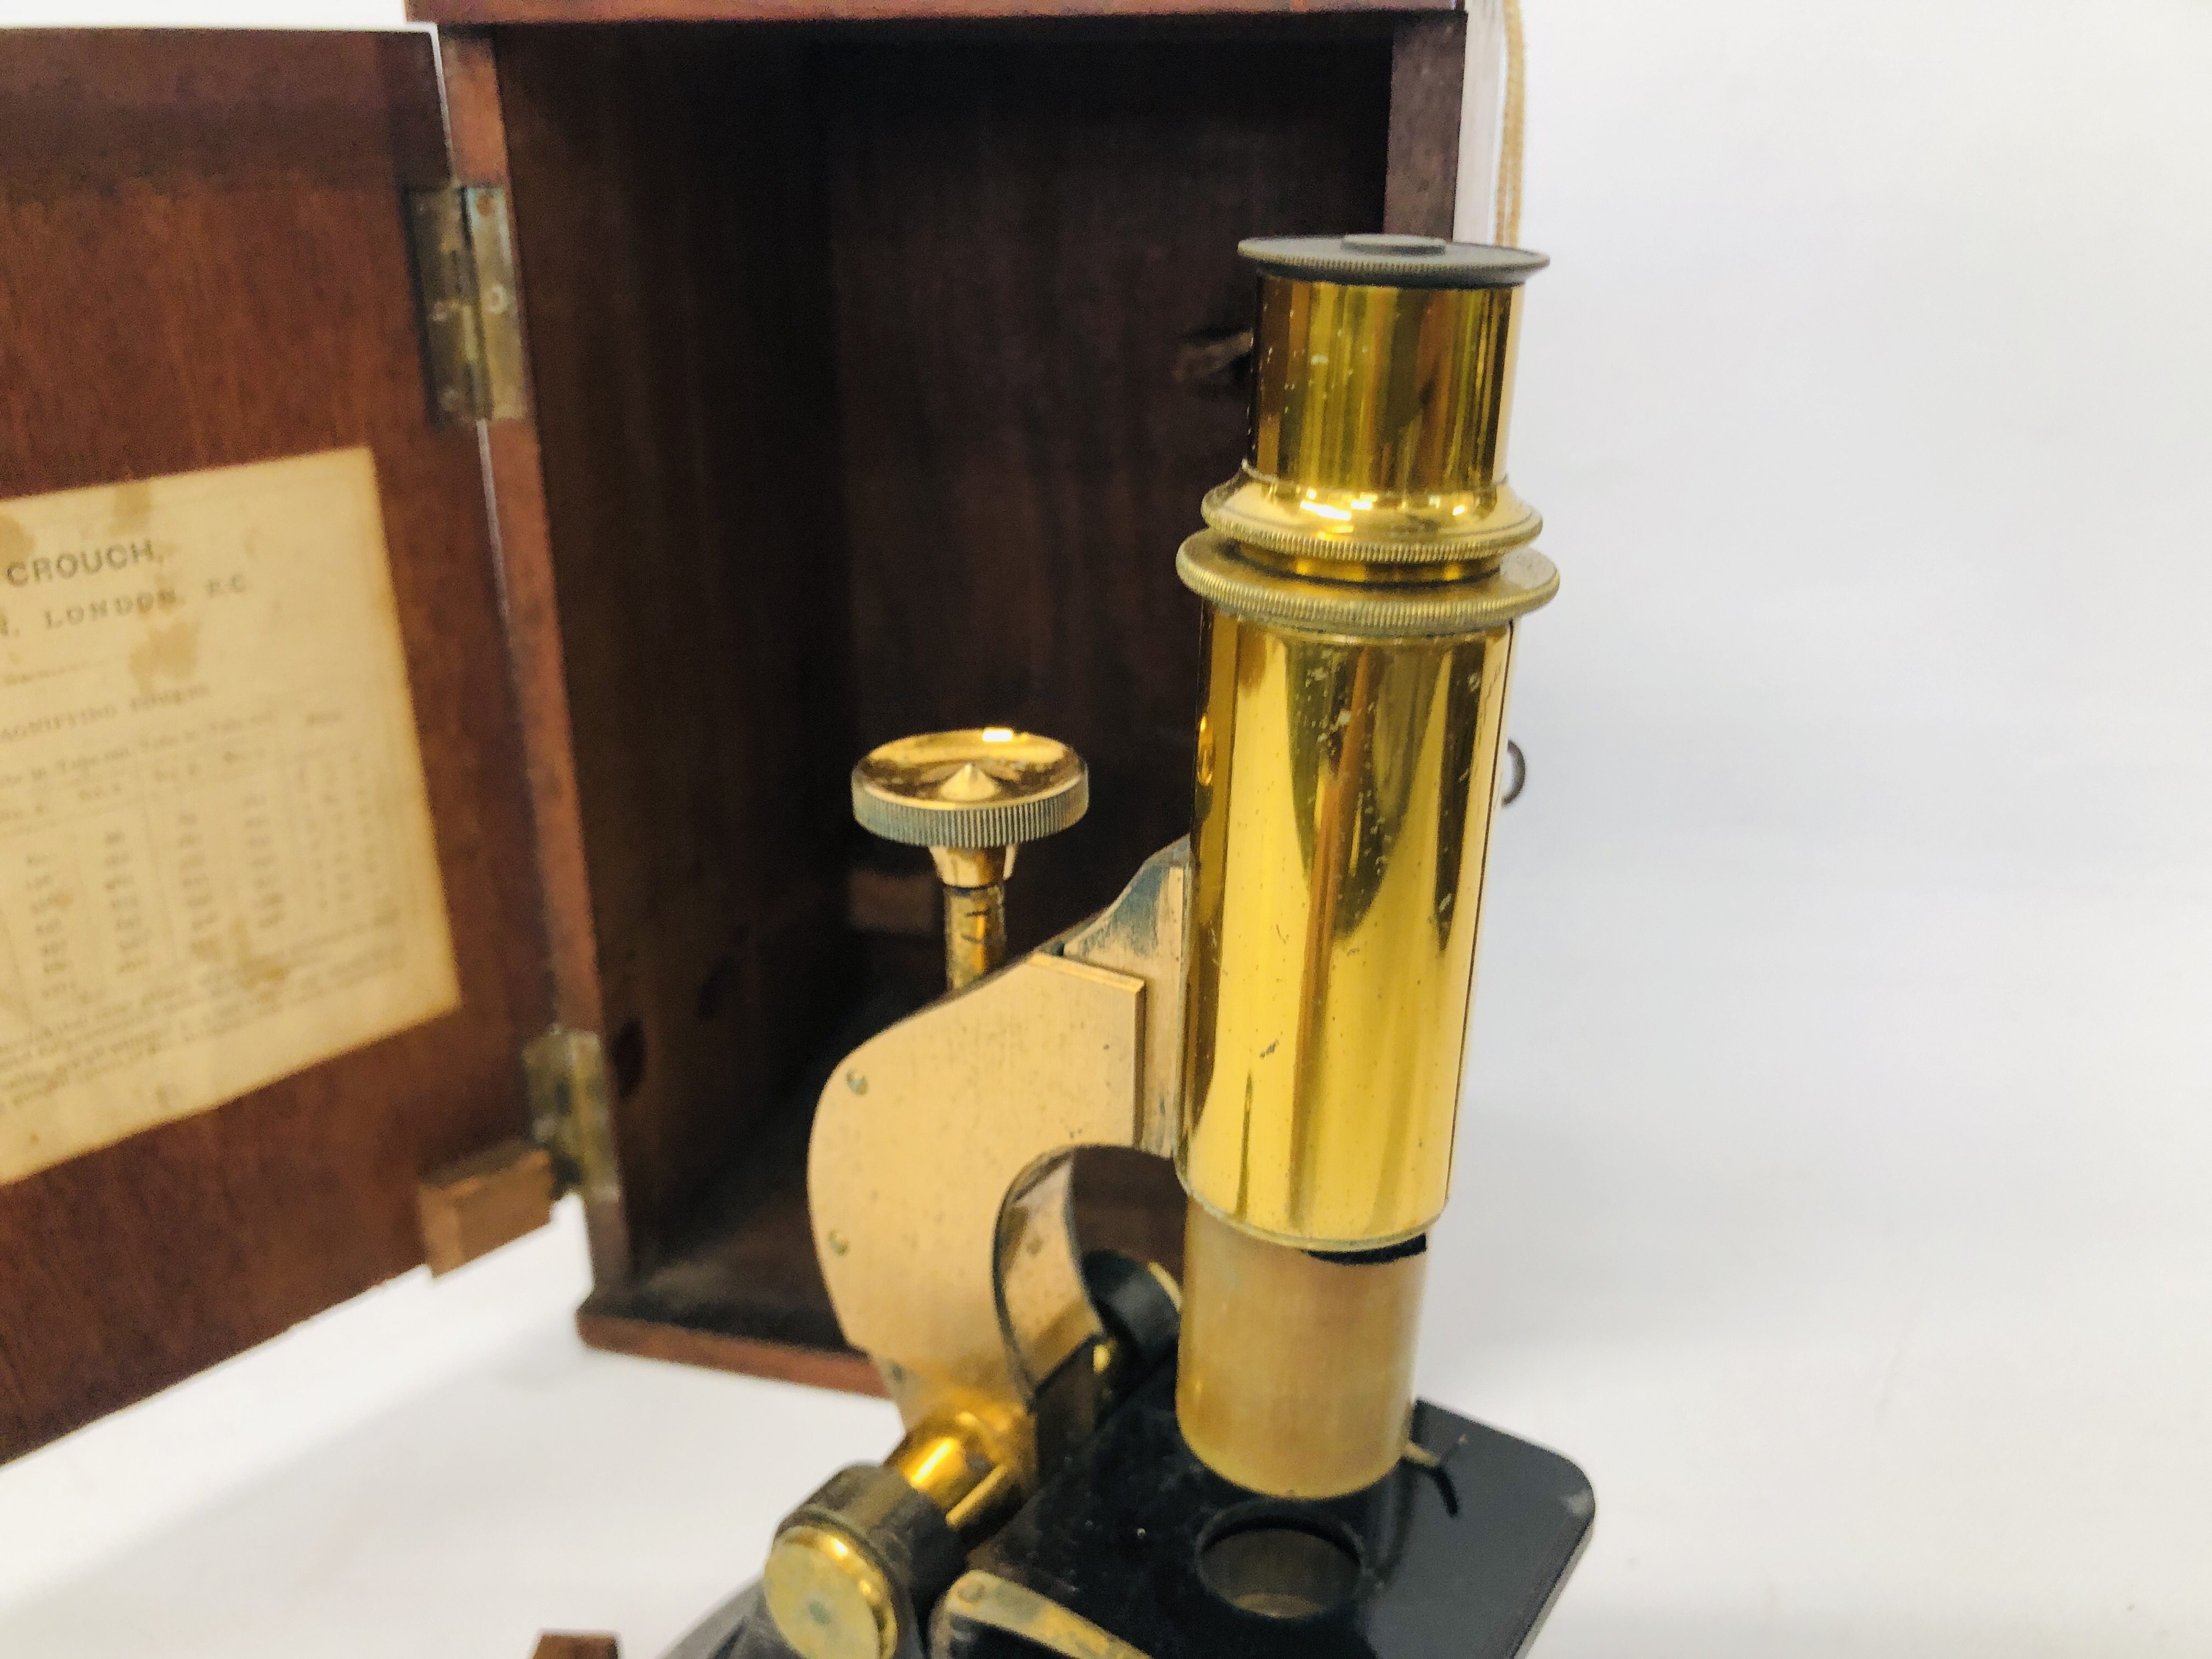 A VICTORIAN HENRY CROUCH LONDON MICROSCOPE WITH VARIOUS EYE PIECES (TOTAL 5) IN MAHOGANY CASE - Image 8 of 14